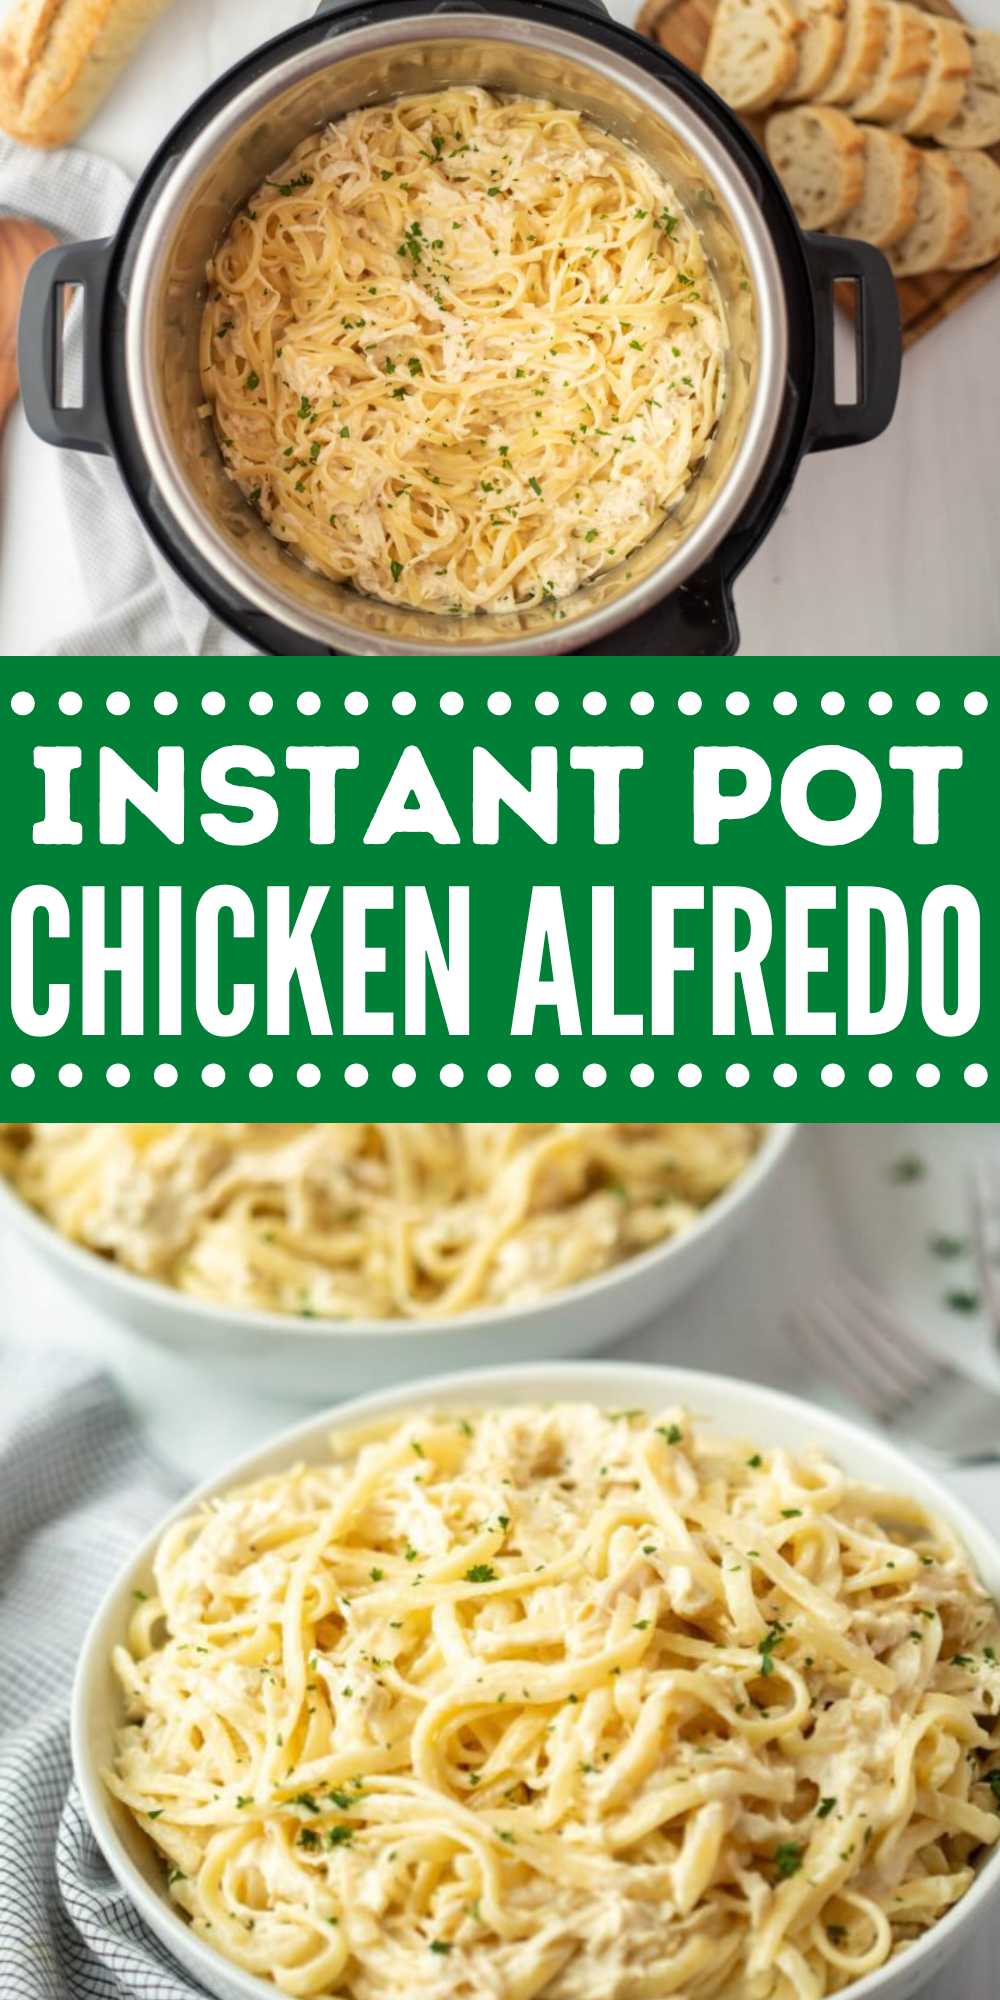 Instant Pot Chicken Alfredo Recipe gets dinner on the table fast. From start to finish, this meal takes minutes for a easy pasta dish. The creamy sauce and tender chicken come together for the best comfort food in minutes. Skip takeout and make this for a fraction of the price. #eatingonadime #instantpot #chickenalfredo